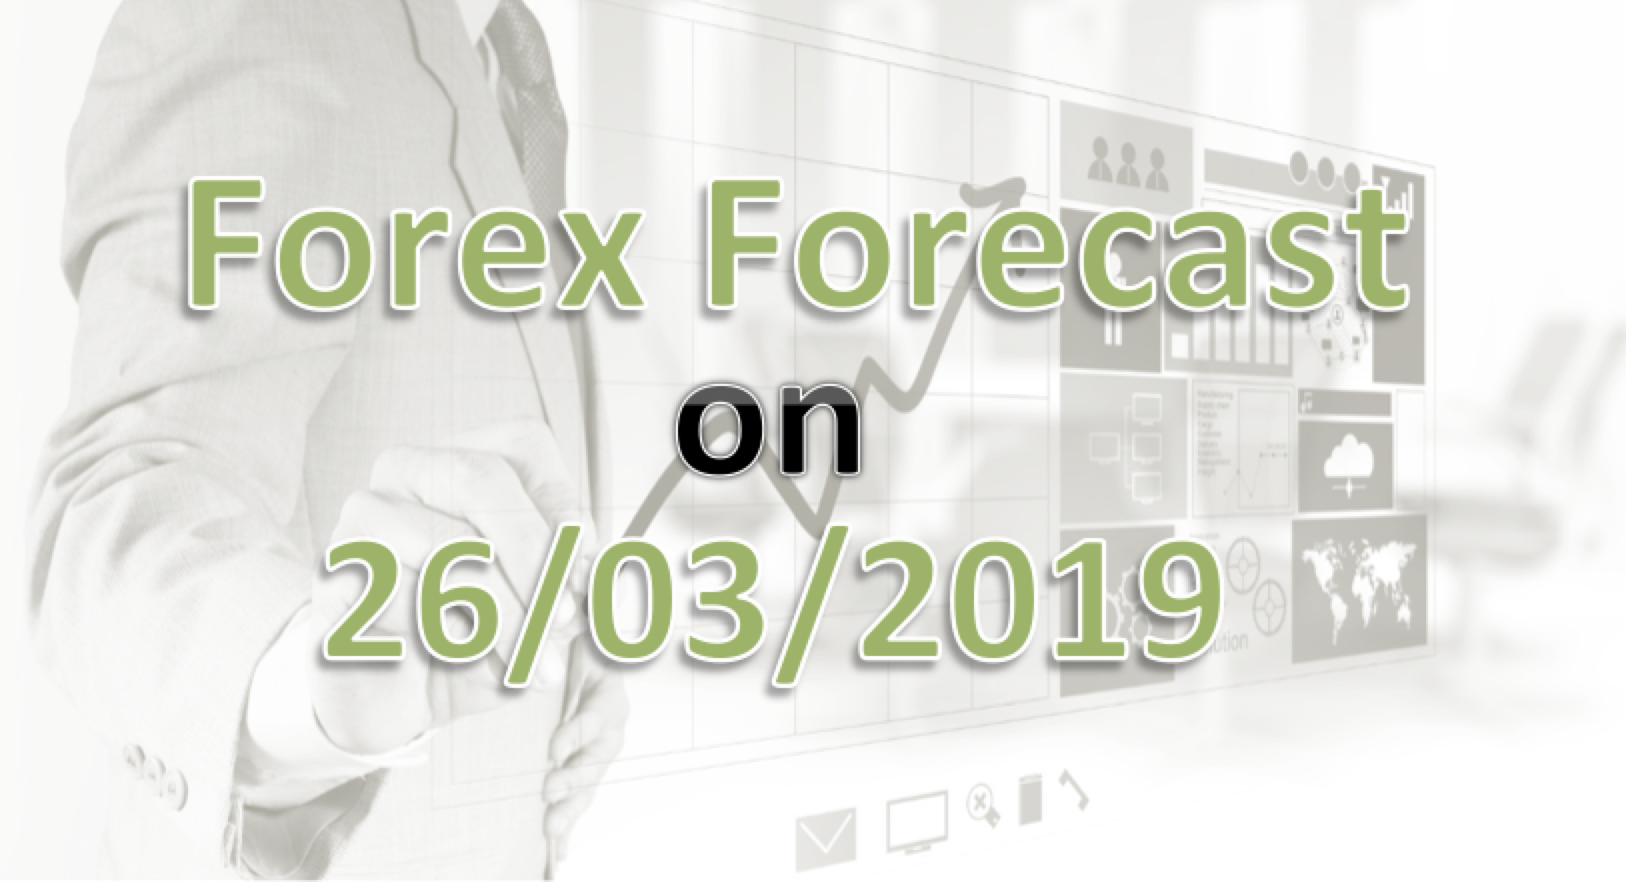 Forecast on 26/03/2019 – US long-term interest has further dropped down to 2.39%